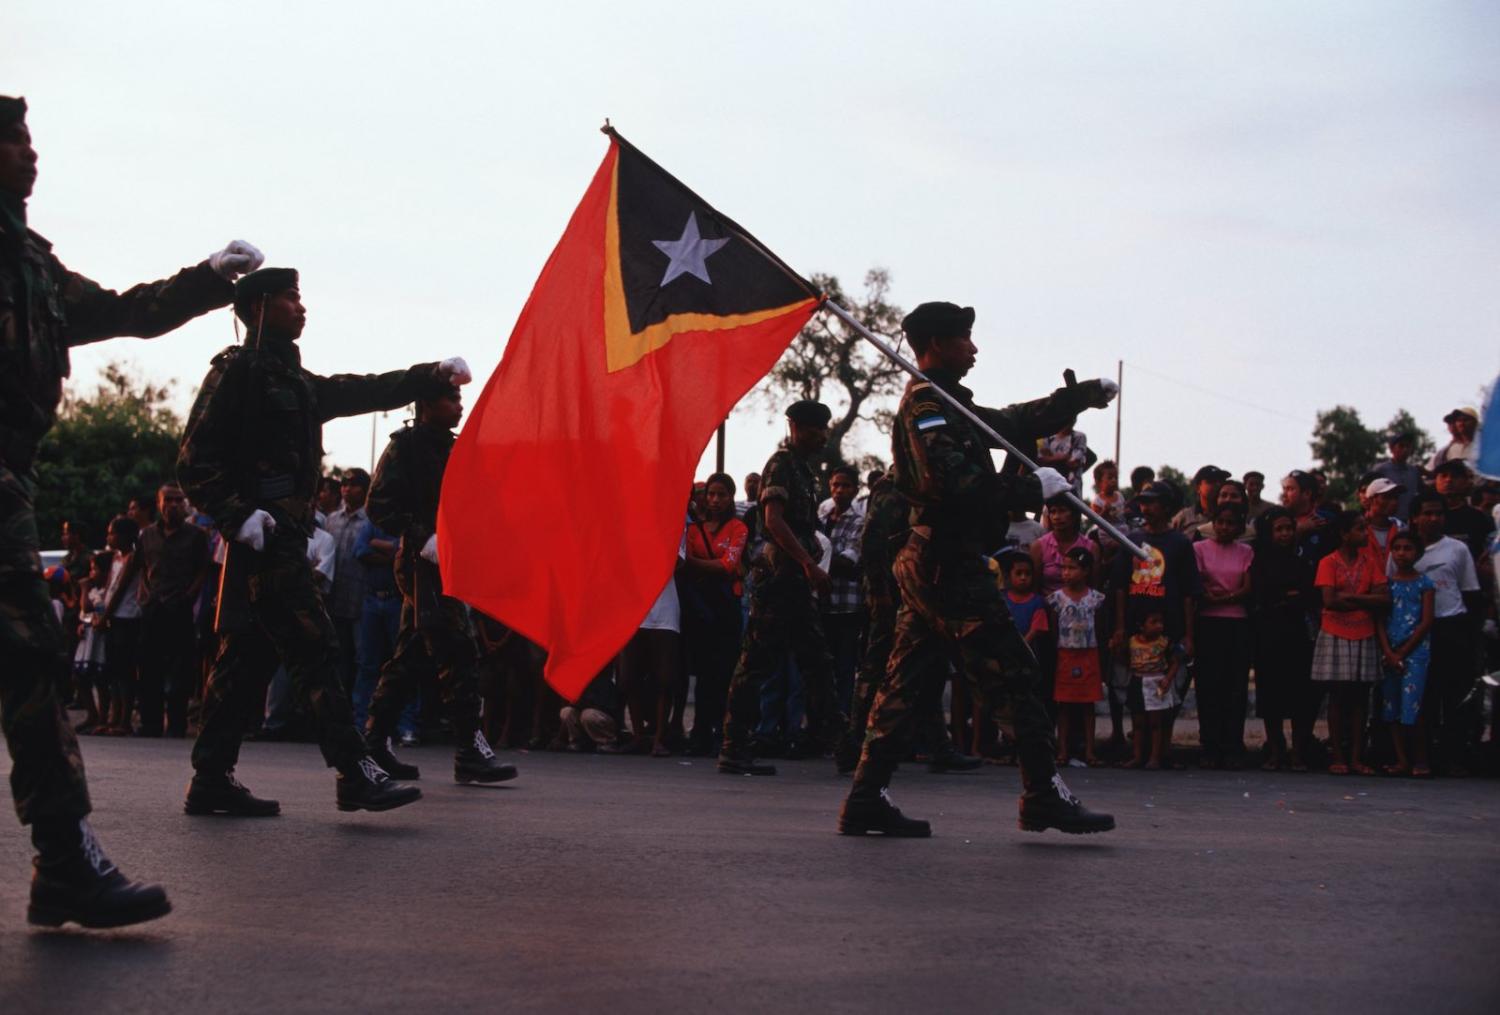 A parade on the anniversary of the founding of Falintil (Armed Forces of National Liberation of East Timor), Dili, 1 August 2002 (Jerry Redfern/LightRocket via Getty Images)